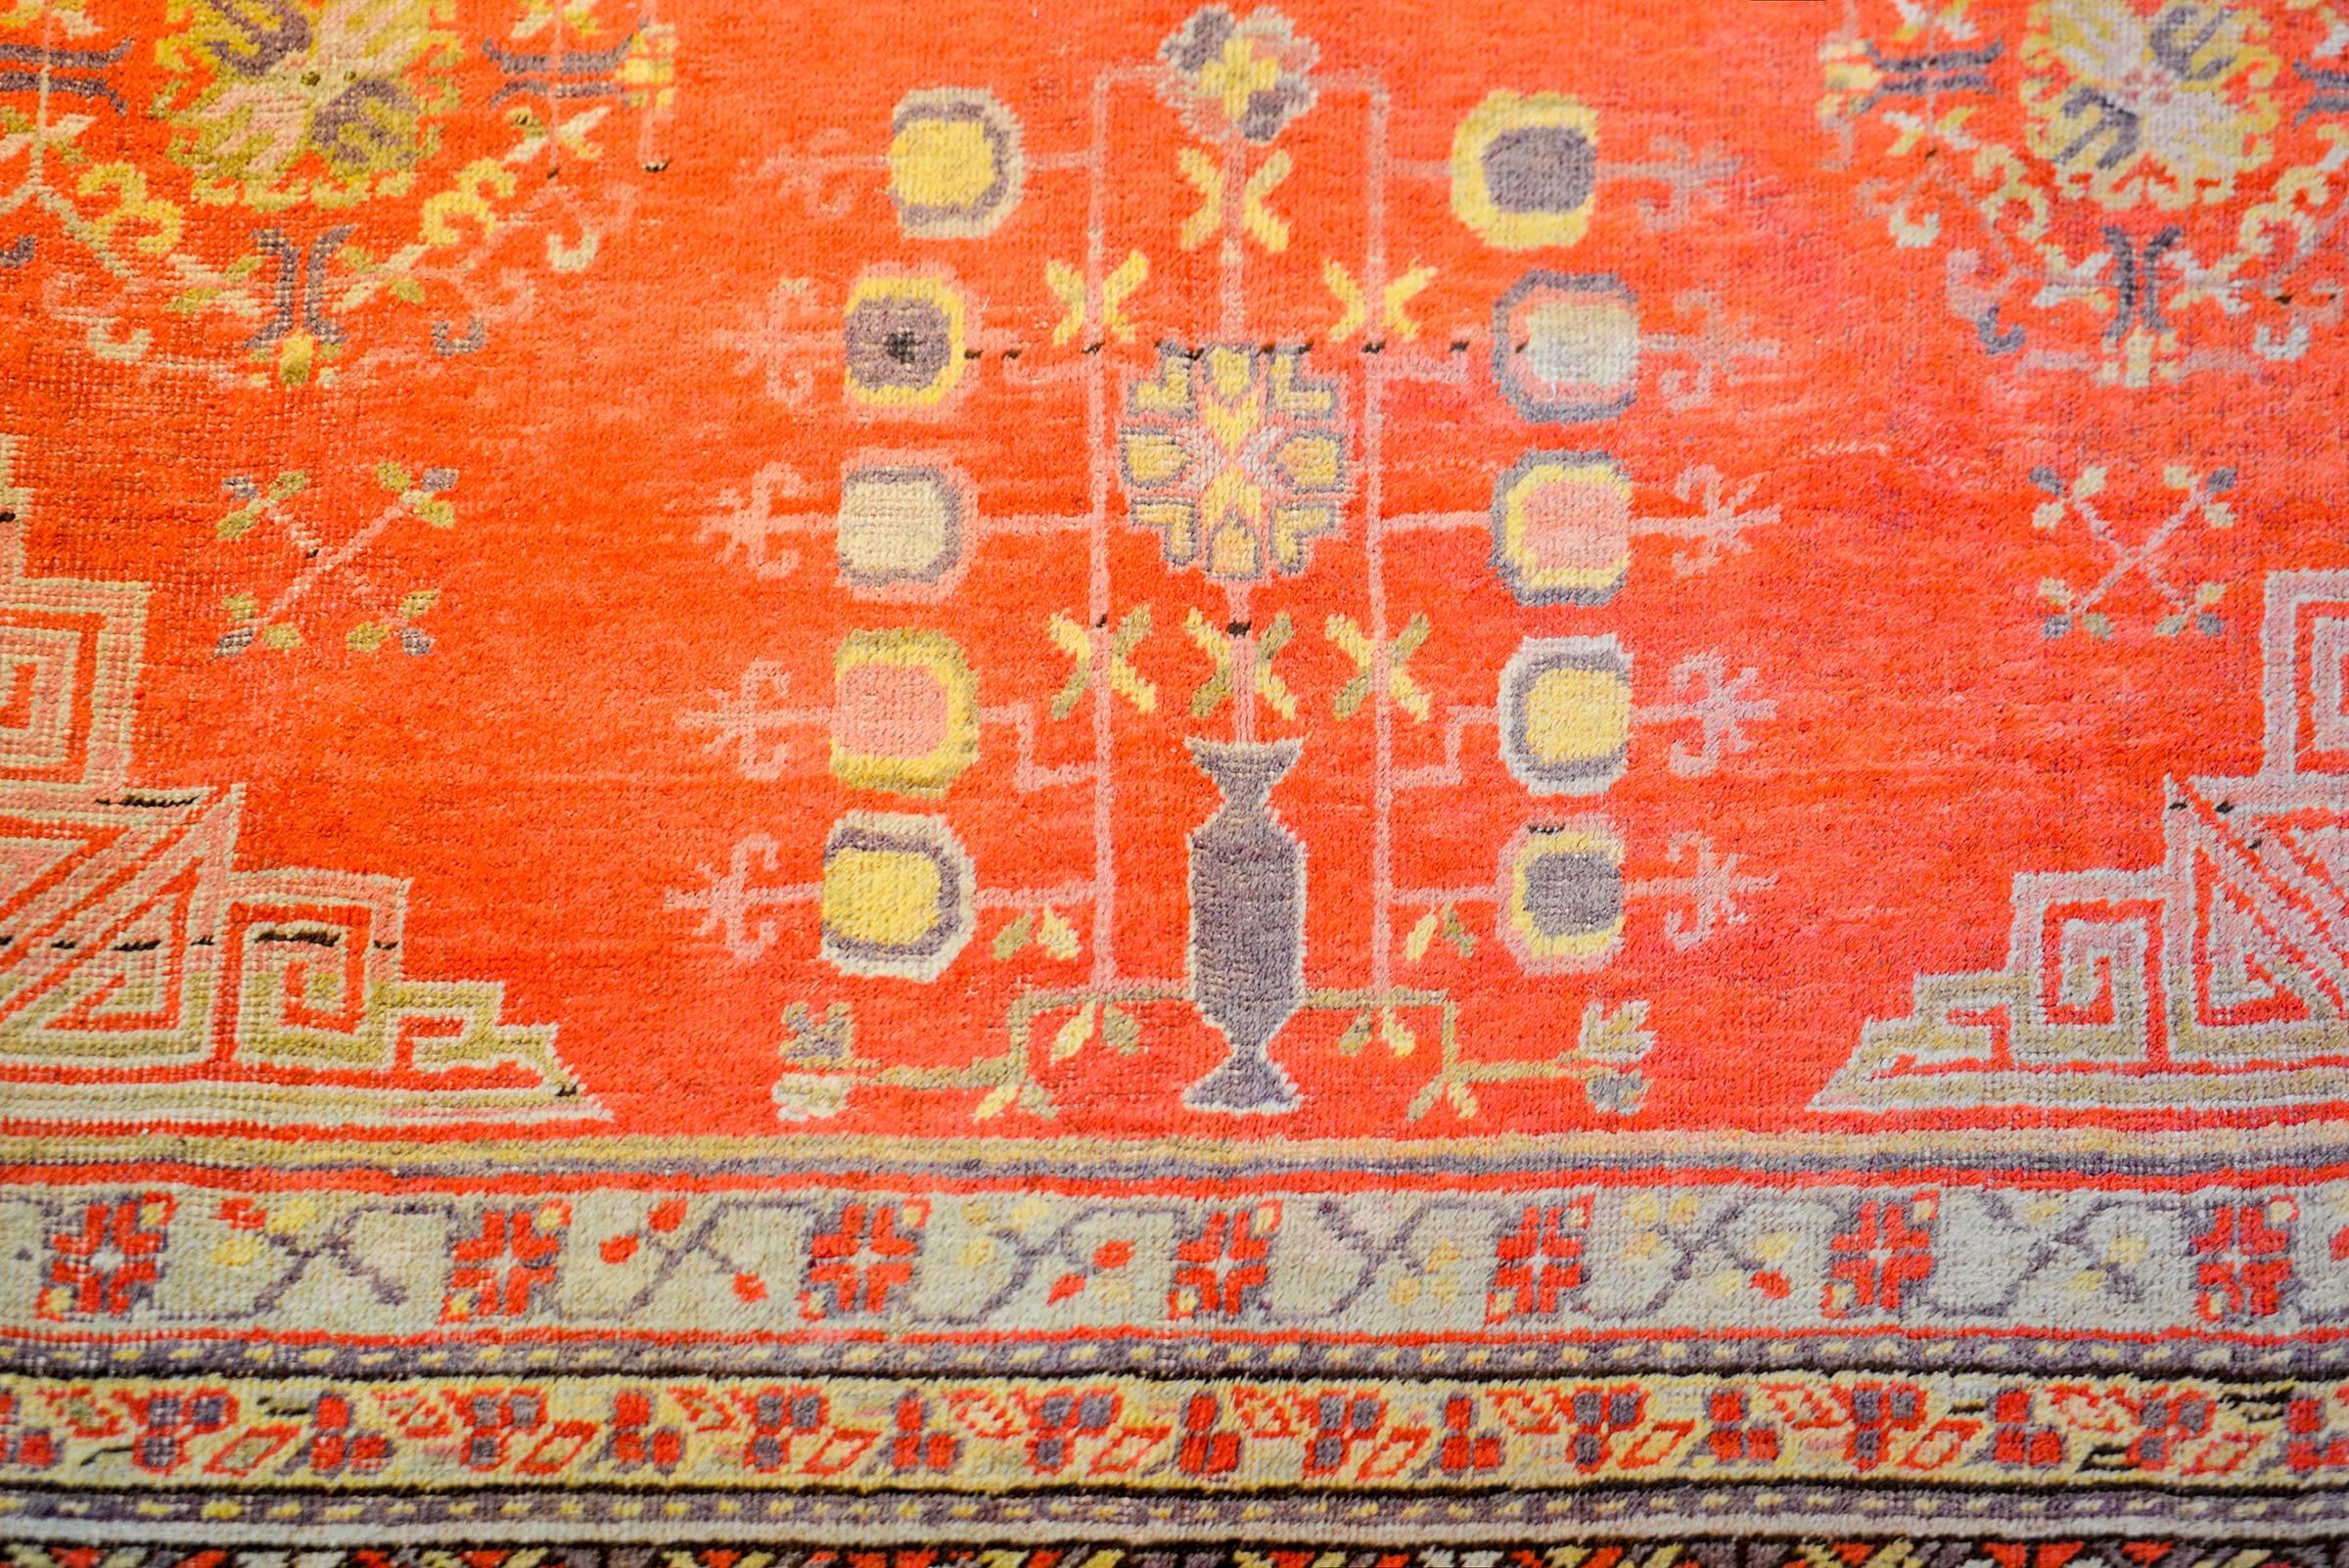 An early 20th century Central Asian Khotan rug with a beautiful orange field of pomegranate, trees-of-life, and floral patterns. The border is wonderfully rendered consisting of a Buddhist meandering motif pattern, multiple petite floral and vine